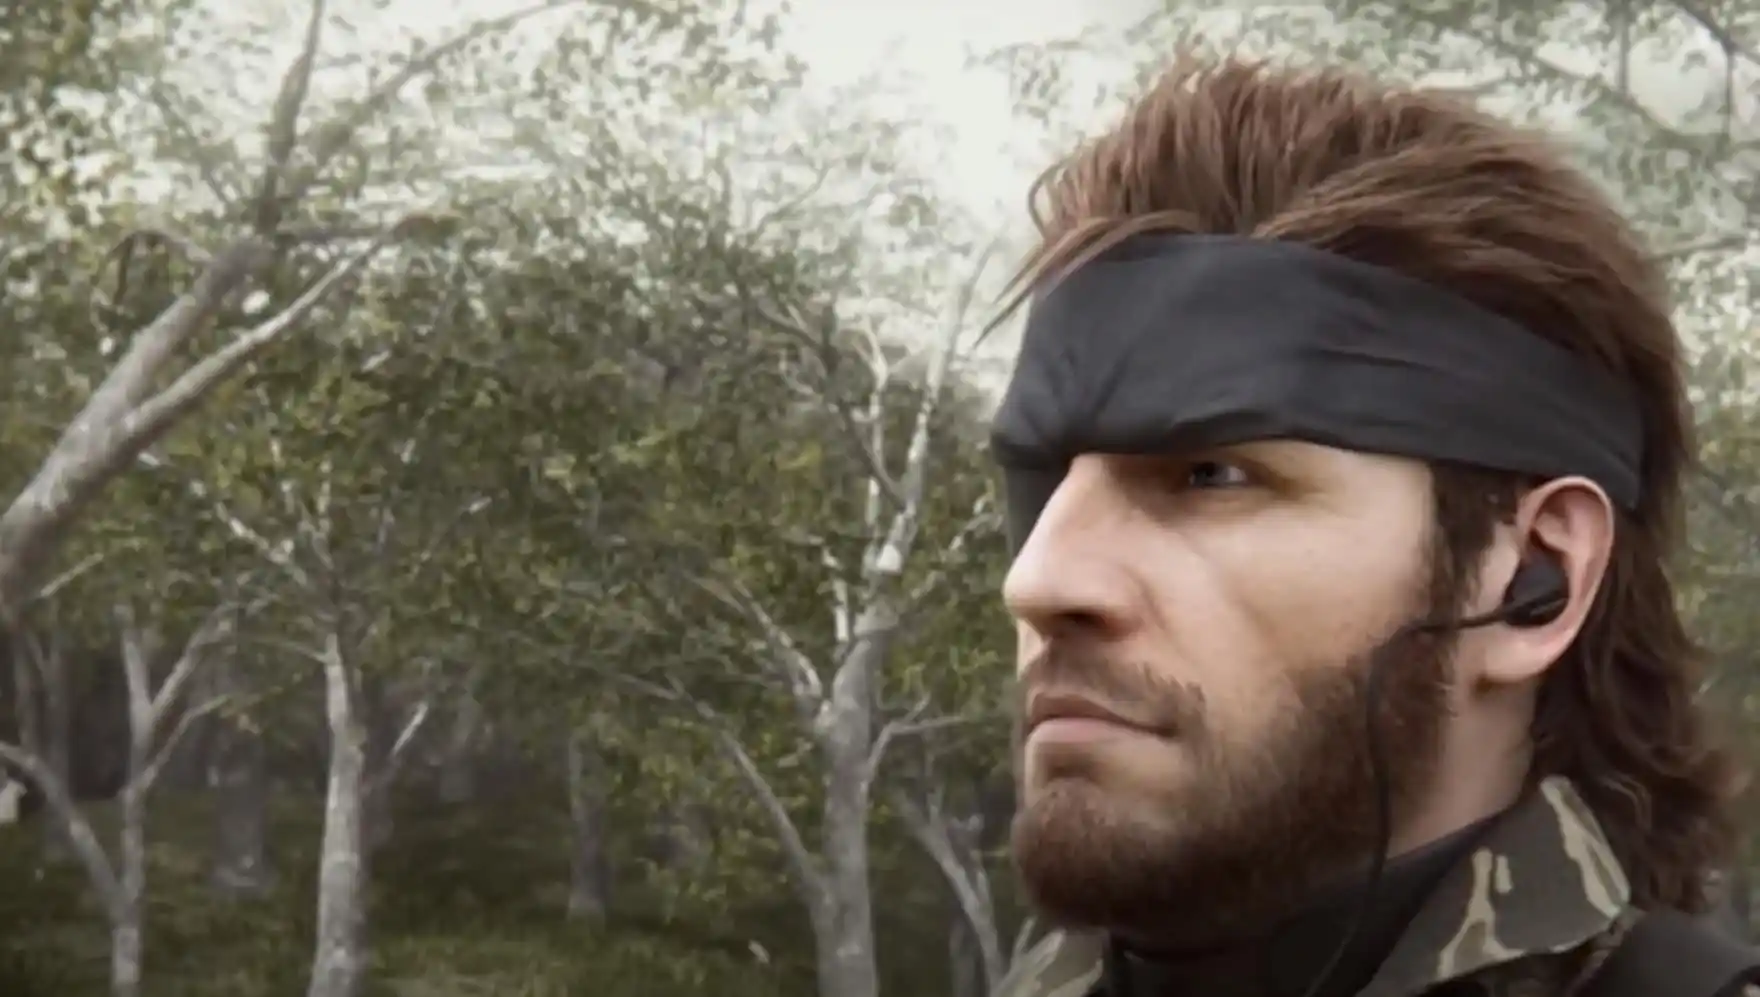 Konami could unveil a remake of Metal Gear Solid 3 and a new Castlevania at E3